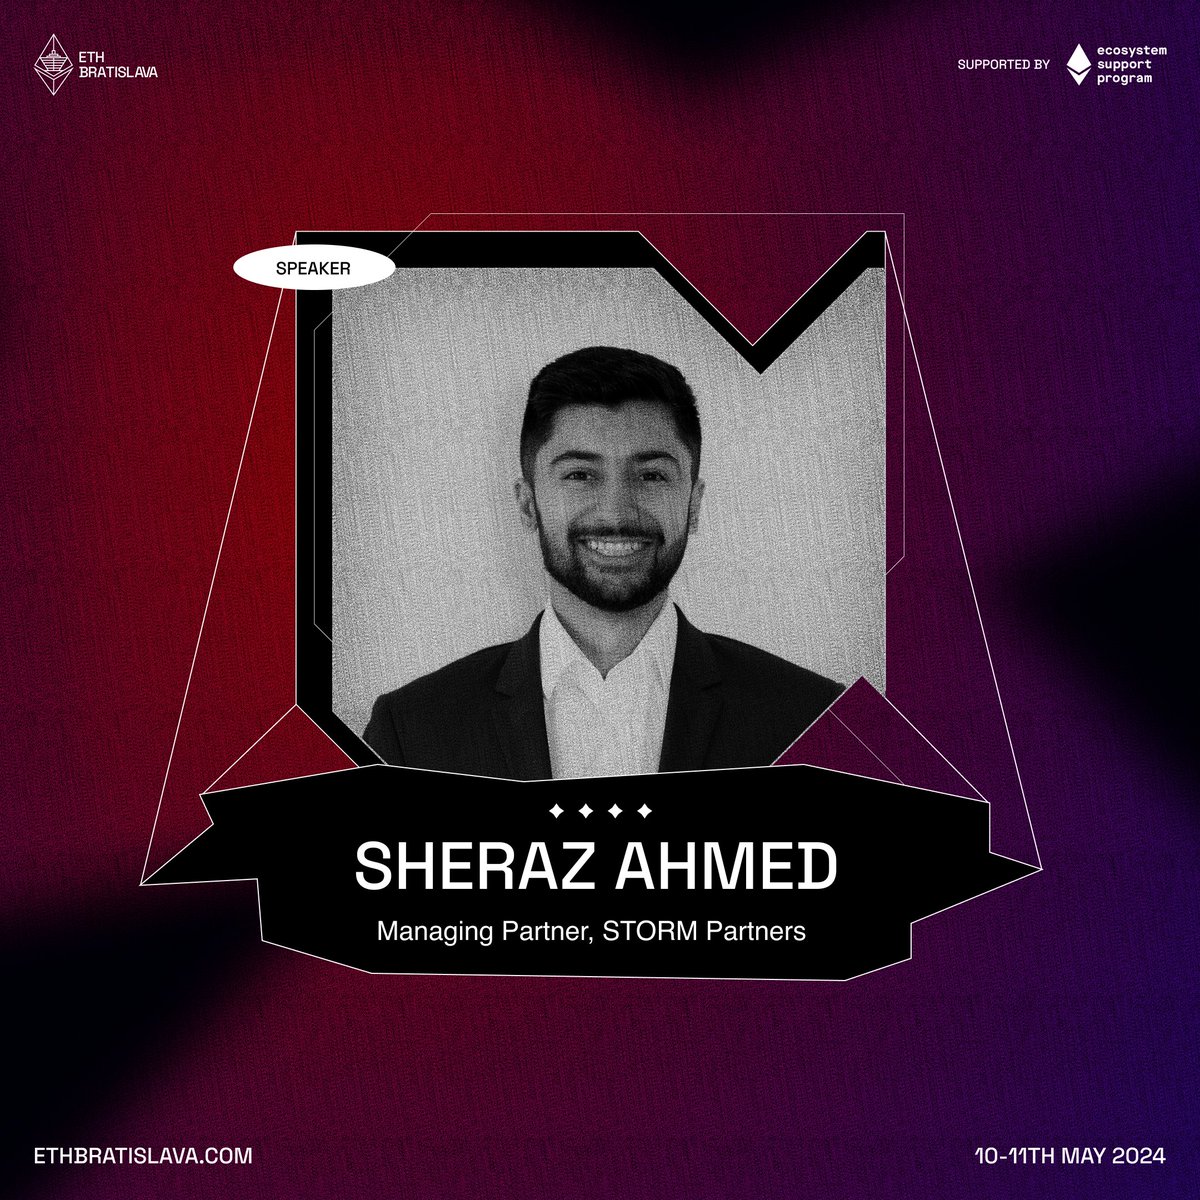 🎉Continuing with our speaker announcements! The next addition to the already strong line-up is Sheraz Ahmed - @CryptoSherazo, the Managing Partner, at @STORM_Partners and Proud member of @TheCryptoValley Association. 👾 We are happy to have you on board! #Ethereum #Hackathon…